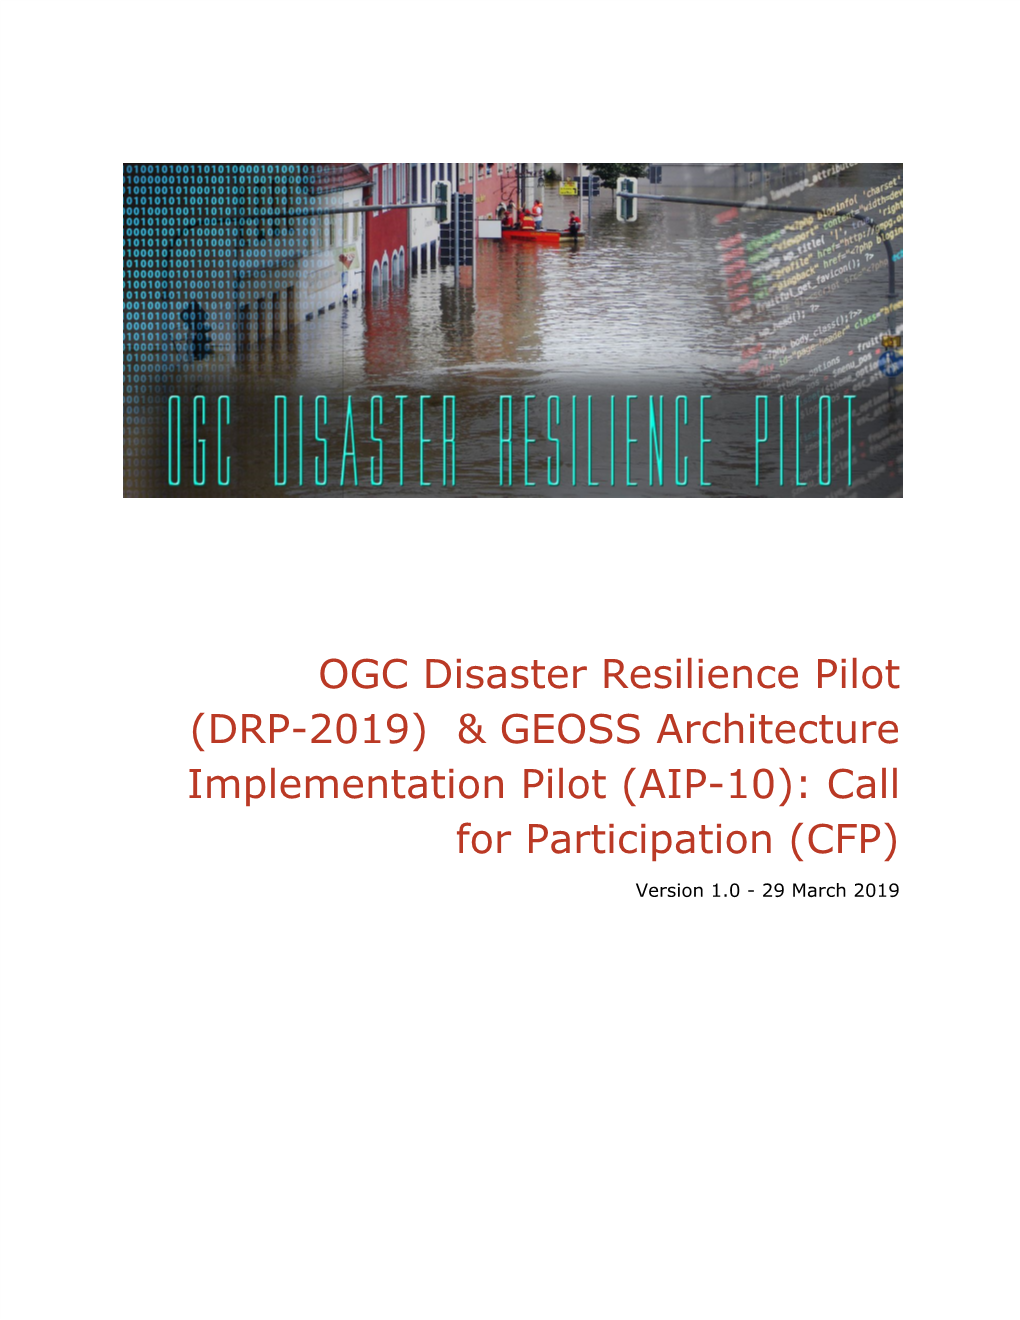 OGC Disaster Resilience Pilot (DRP-2019) & GEOSS Architecture Implementation Pilot (AIP-10): Call for Participation (CFP)